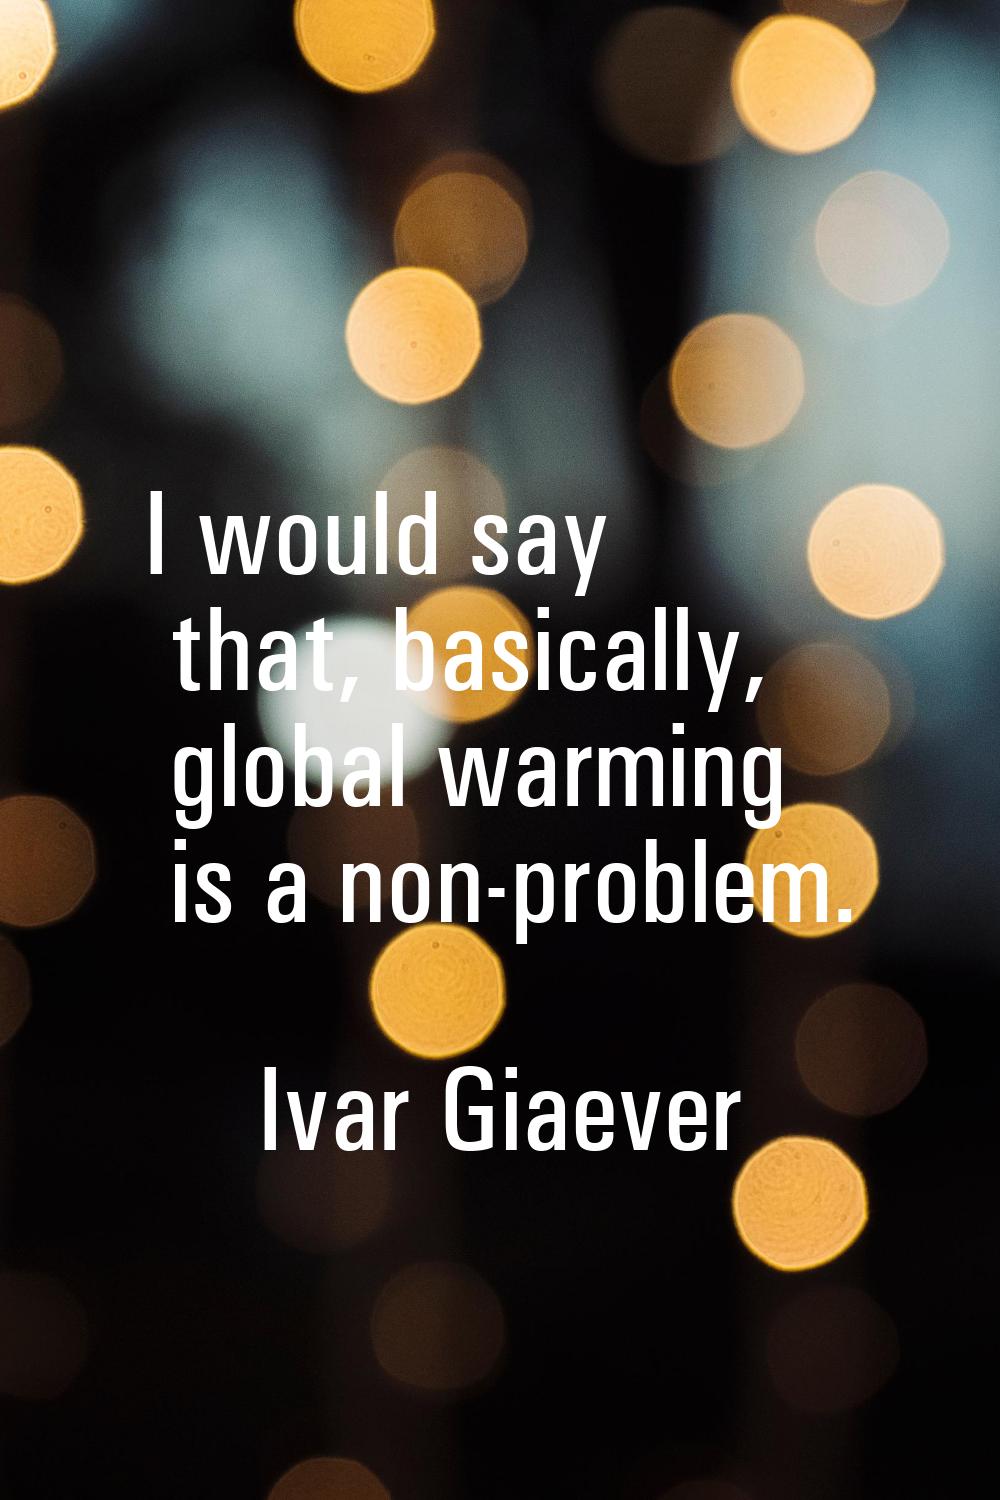 I would say that, basically, global warming is a non-problem.